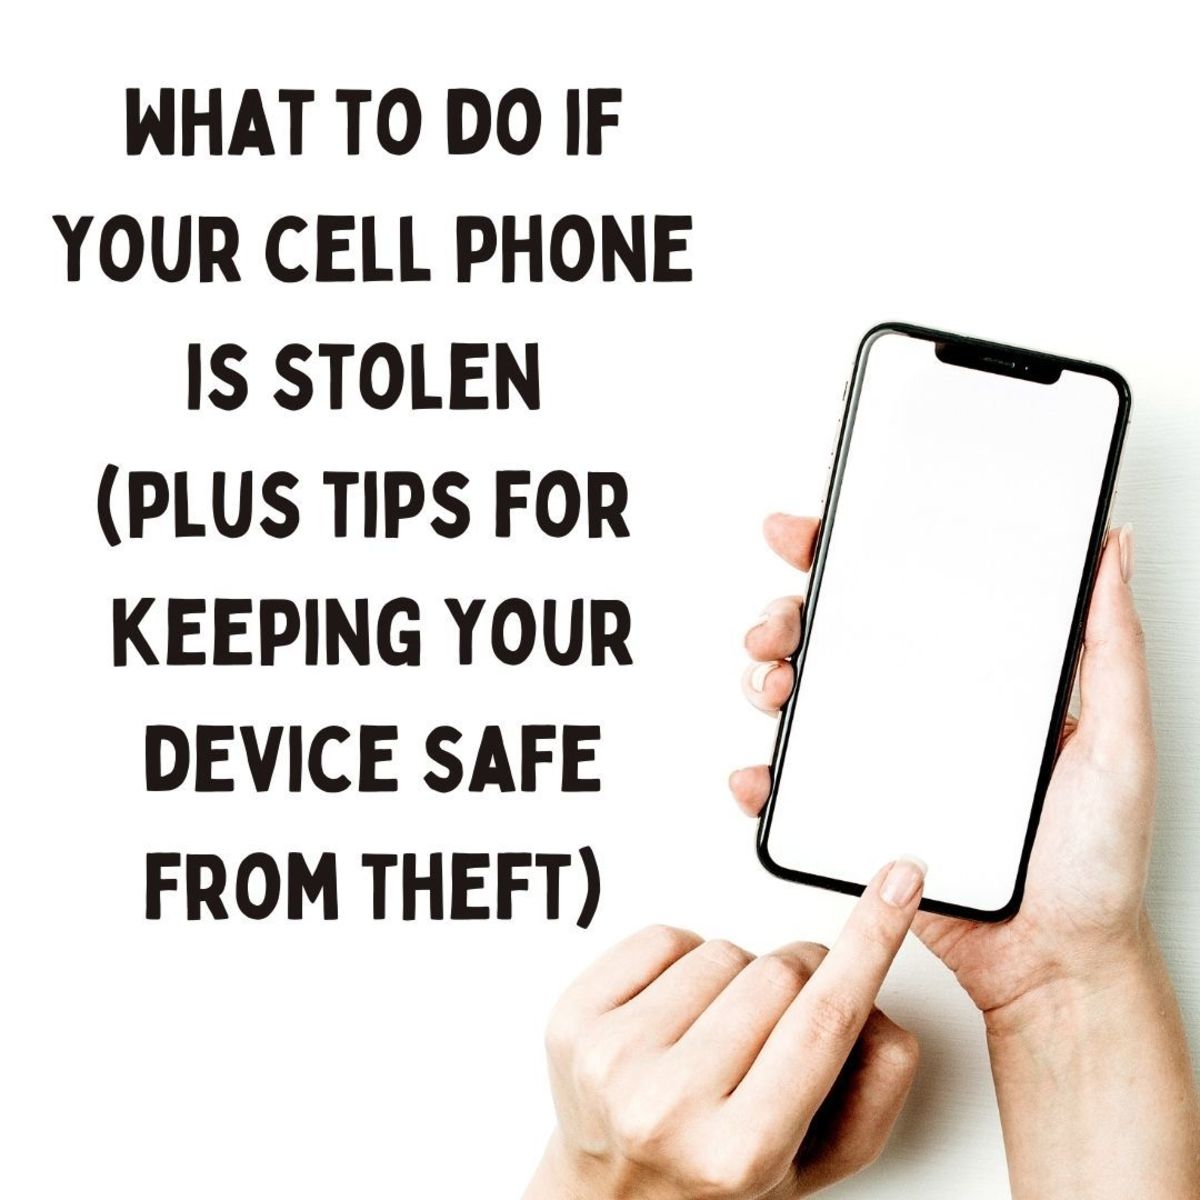 What to Do If Your Cell Phone Is Stolen